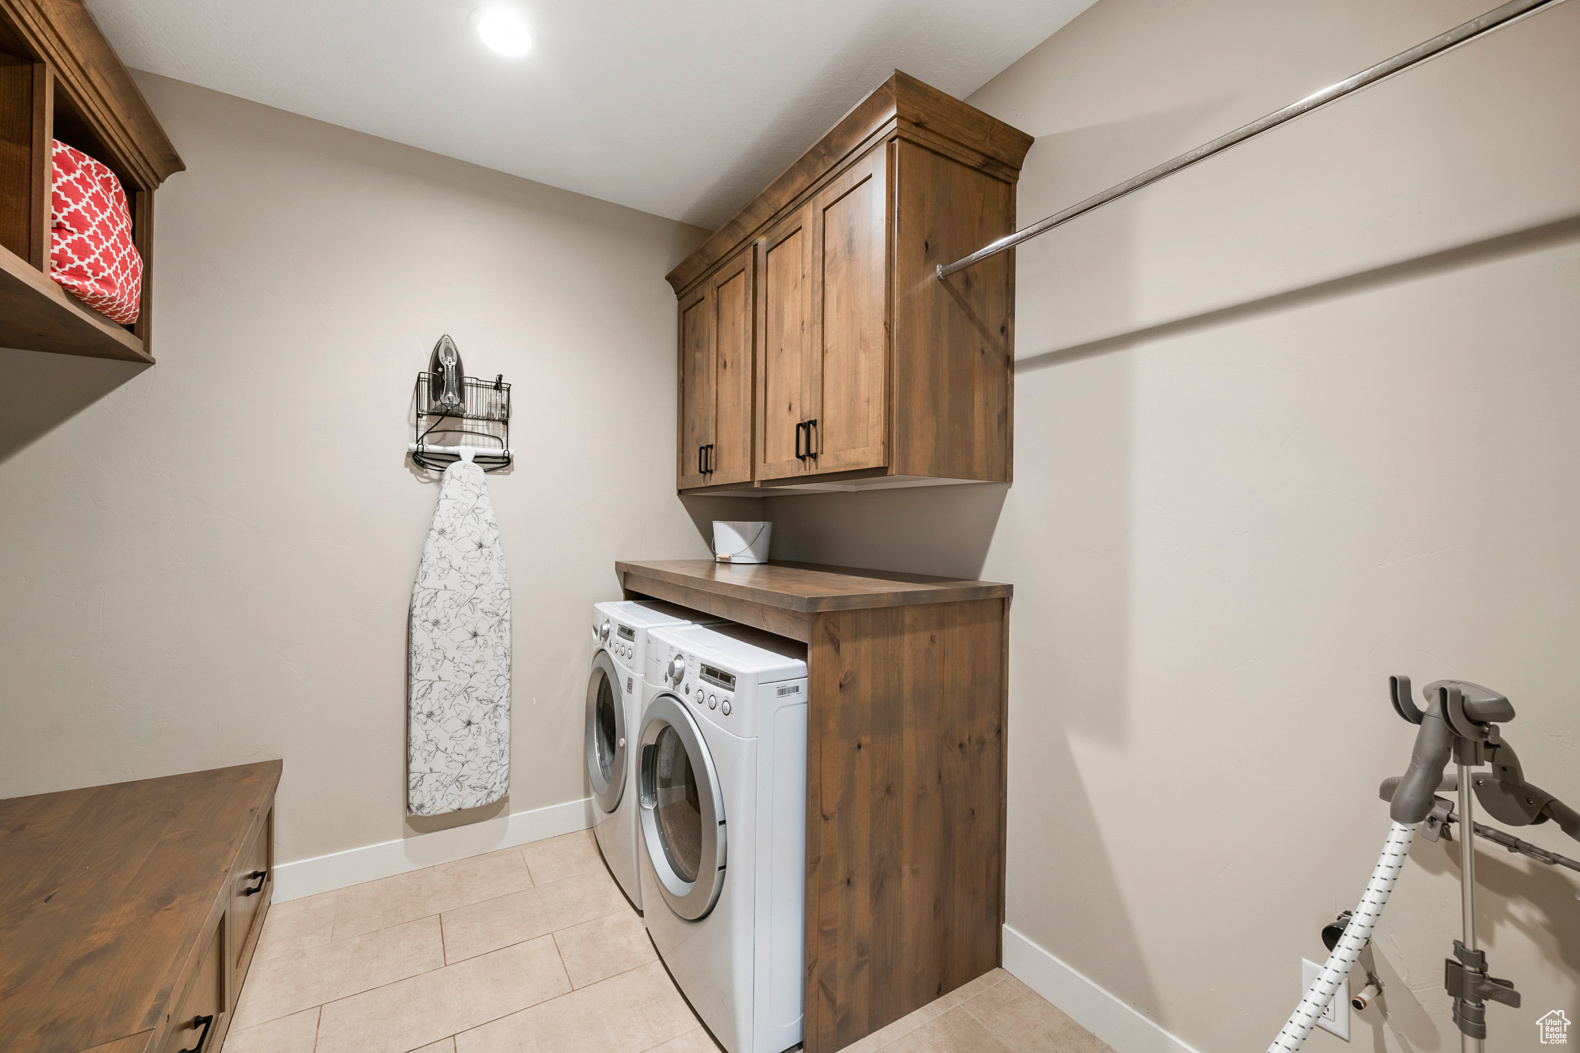 Laundry room with independent washer and dryer, cabinets, and light tile floors